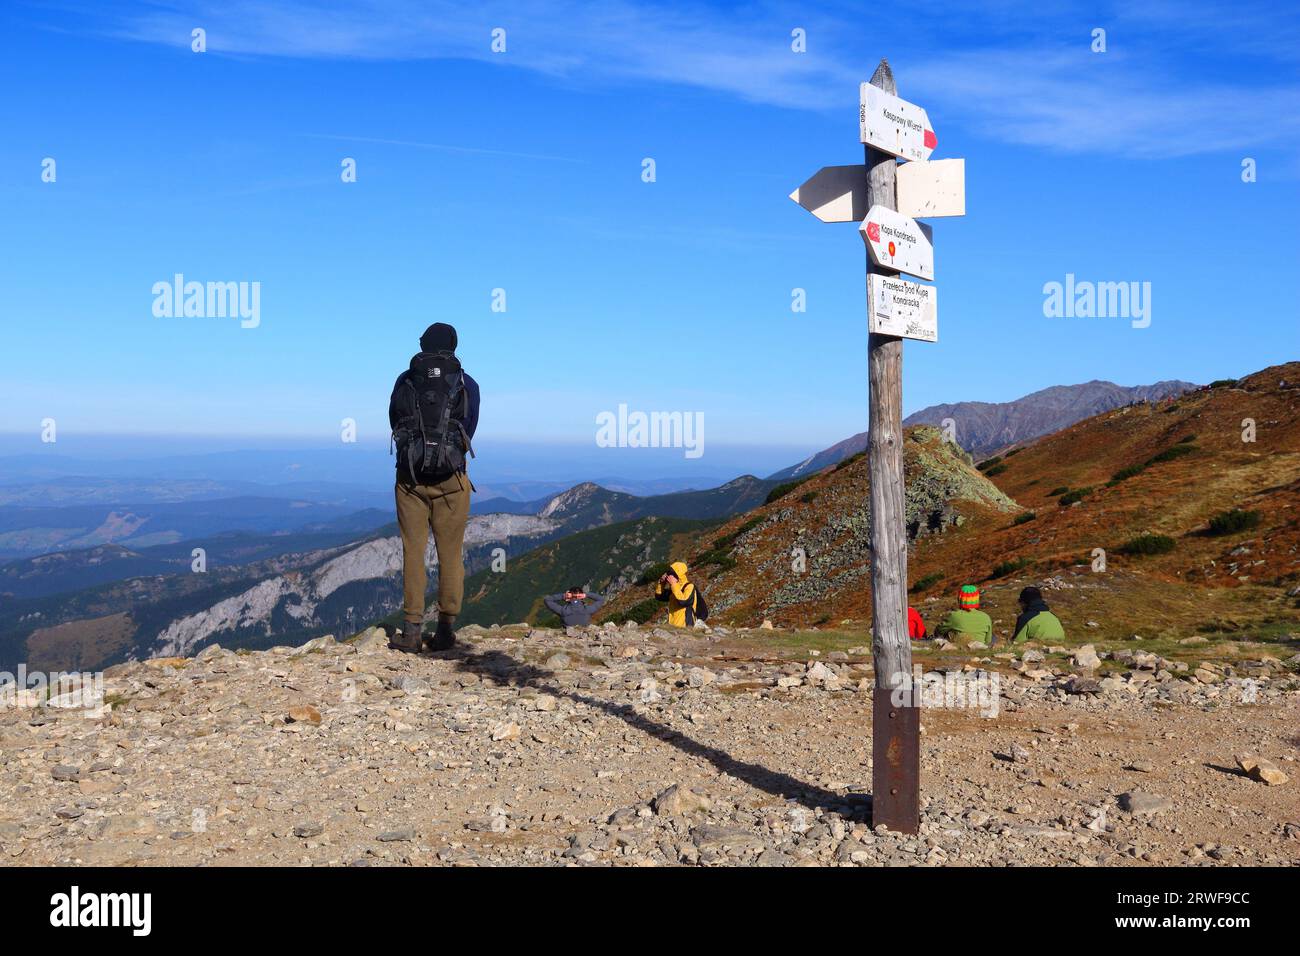 TATRA MOUNTAINS, POLAND - OCTOBER 3, 2015: People hike in Czerwone Wierchy in Tatra Mountains, Poland. Tatra National Park was visited by 2.7 million Stock Photo